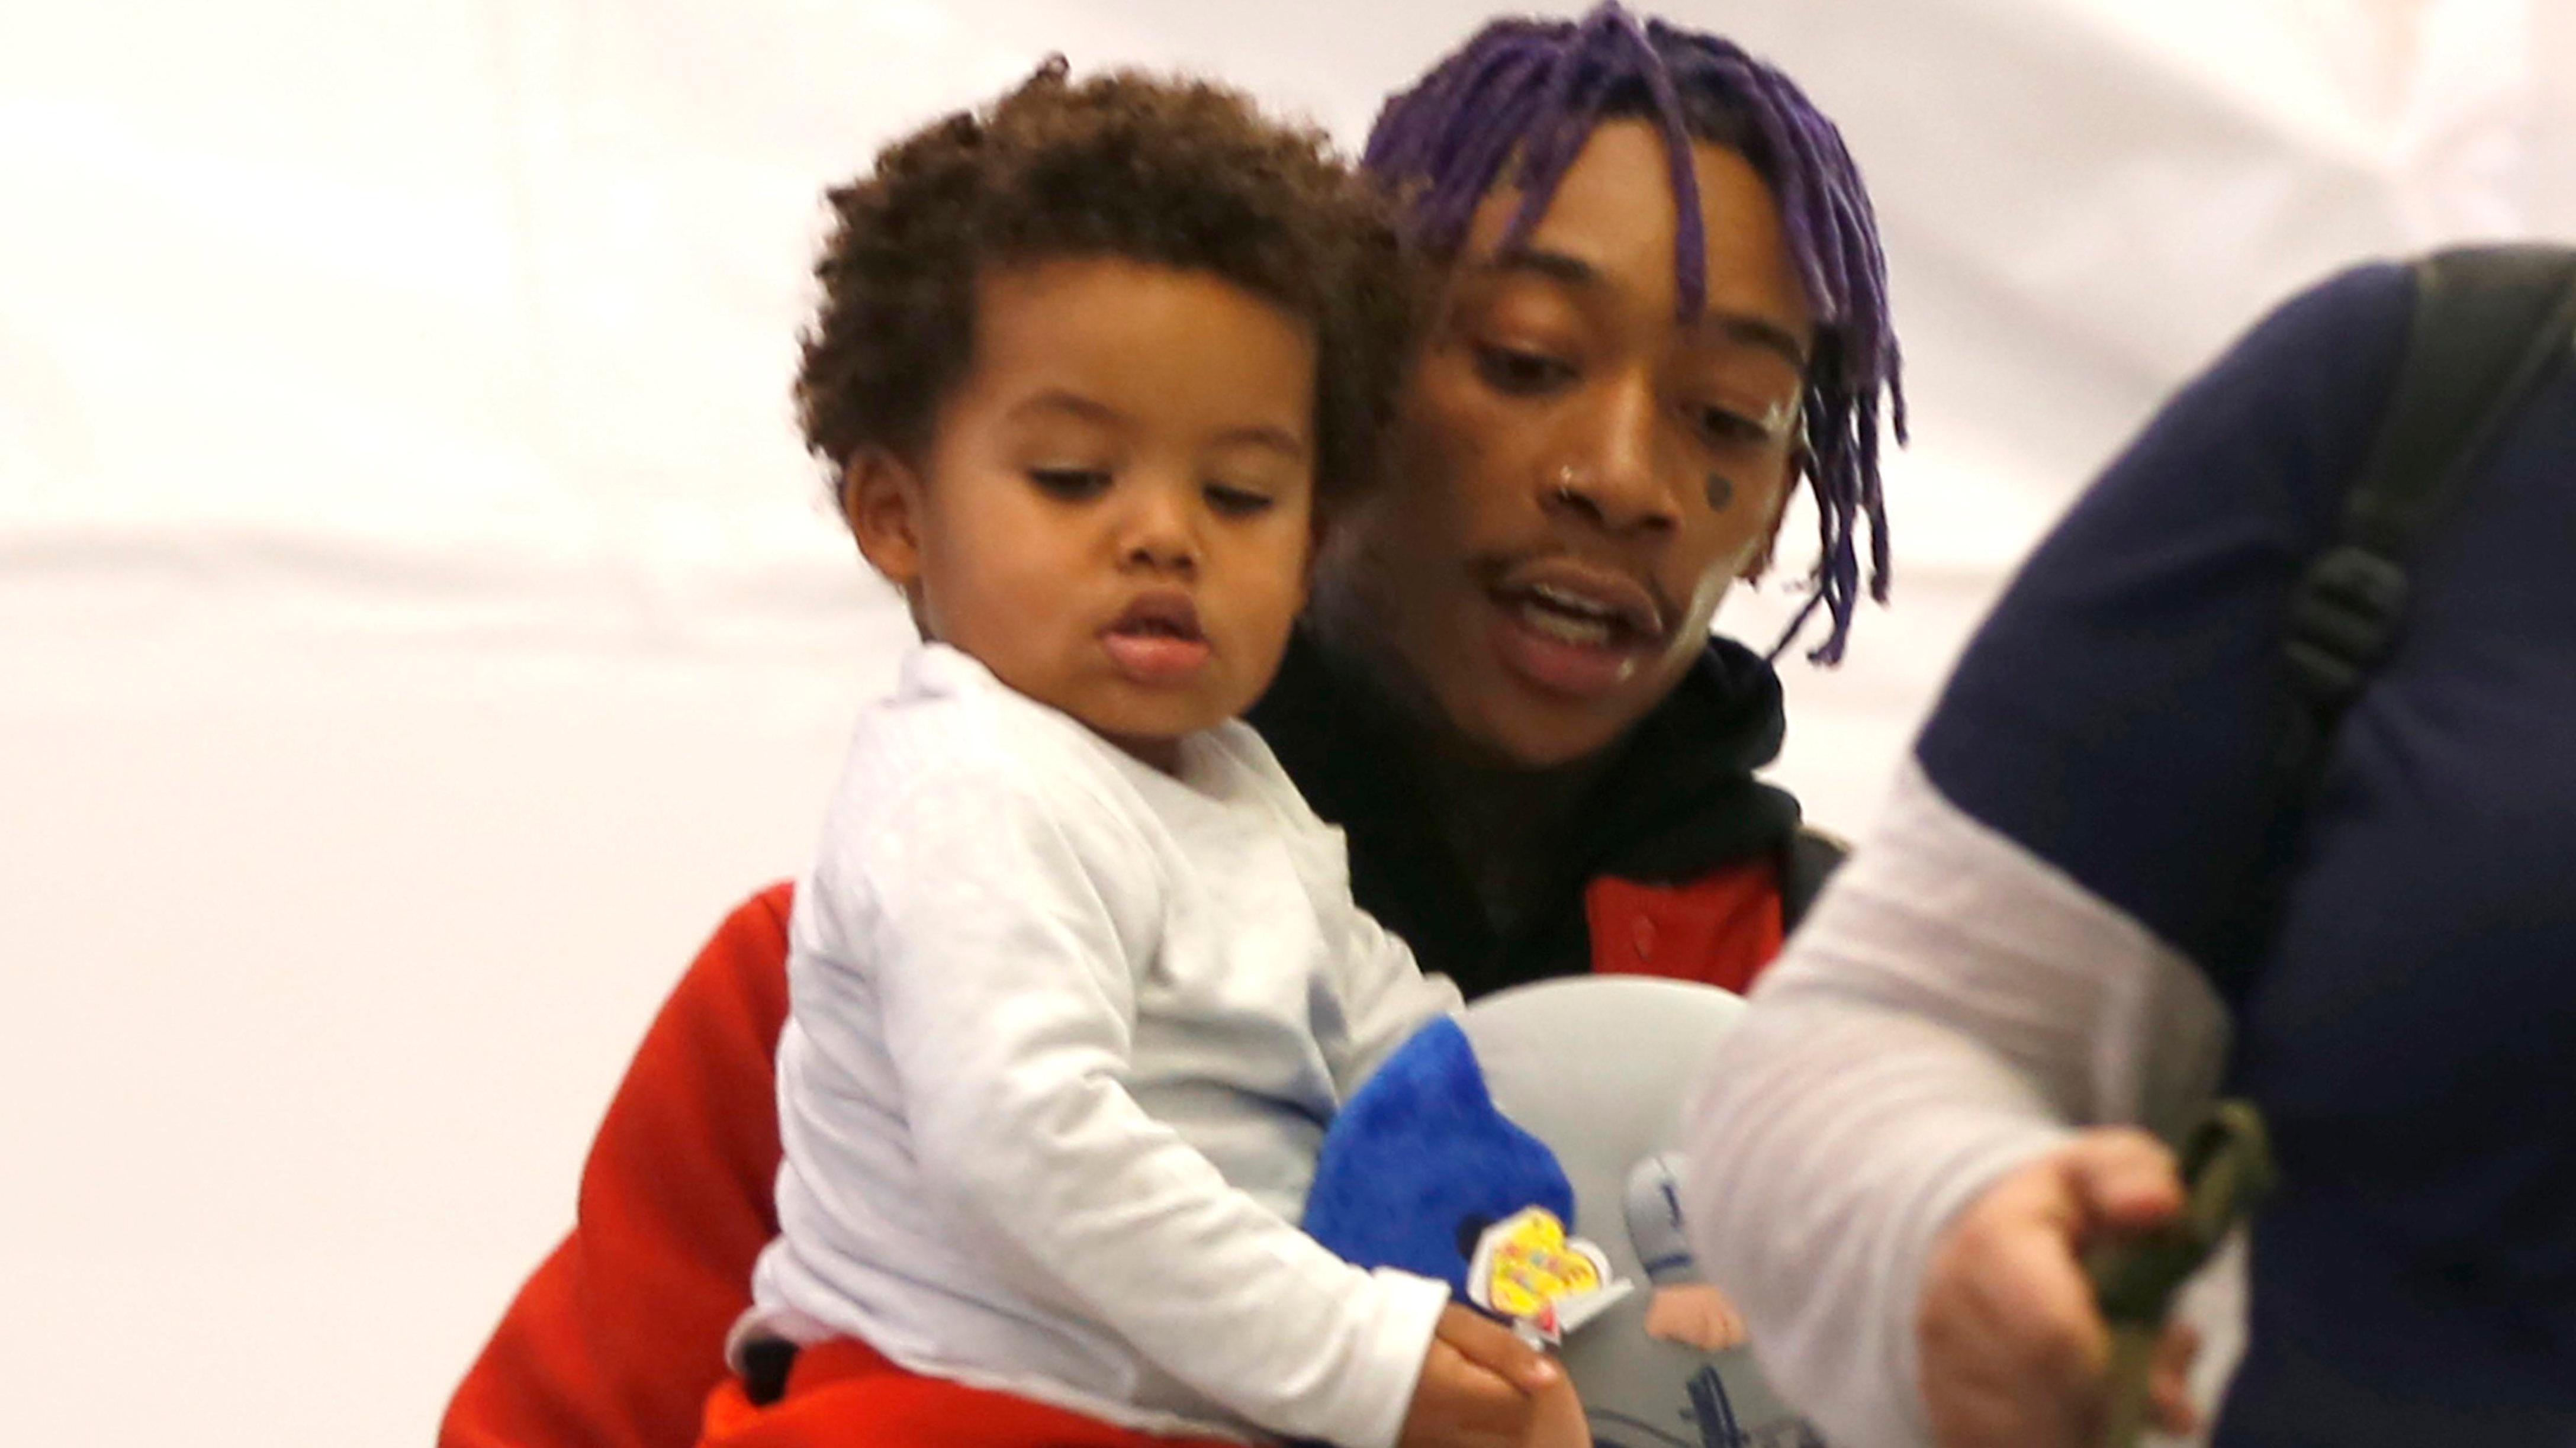 EXCLUSIVE: Rapper, Wiz Khalifa spotted holding his adorable son, Sebastian Taylor Thomaz as they arrive in Los Angeles